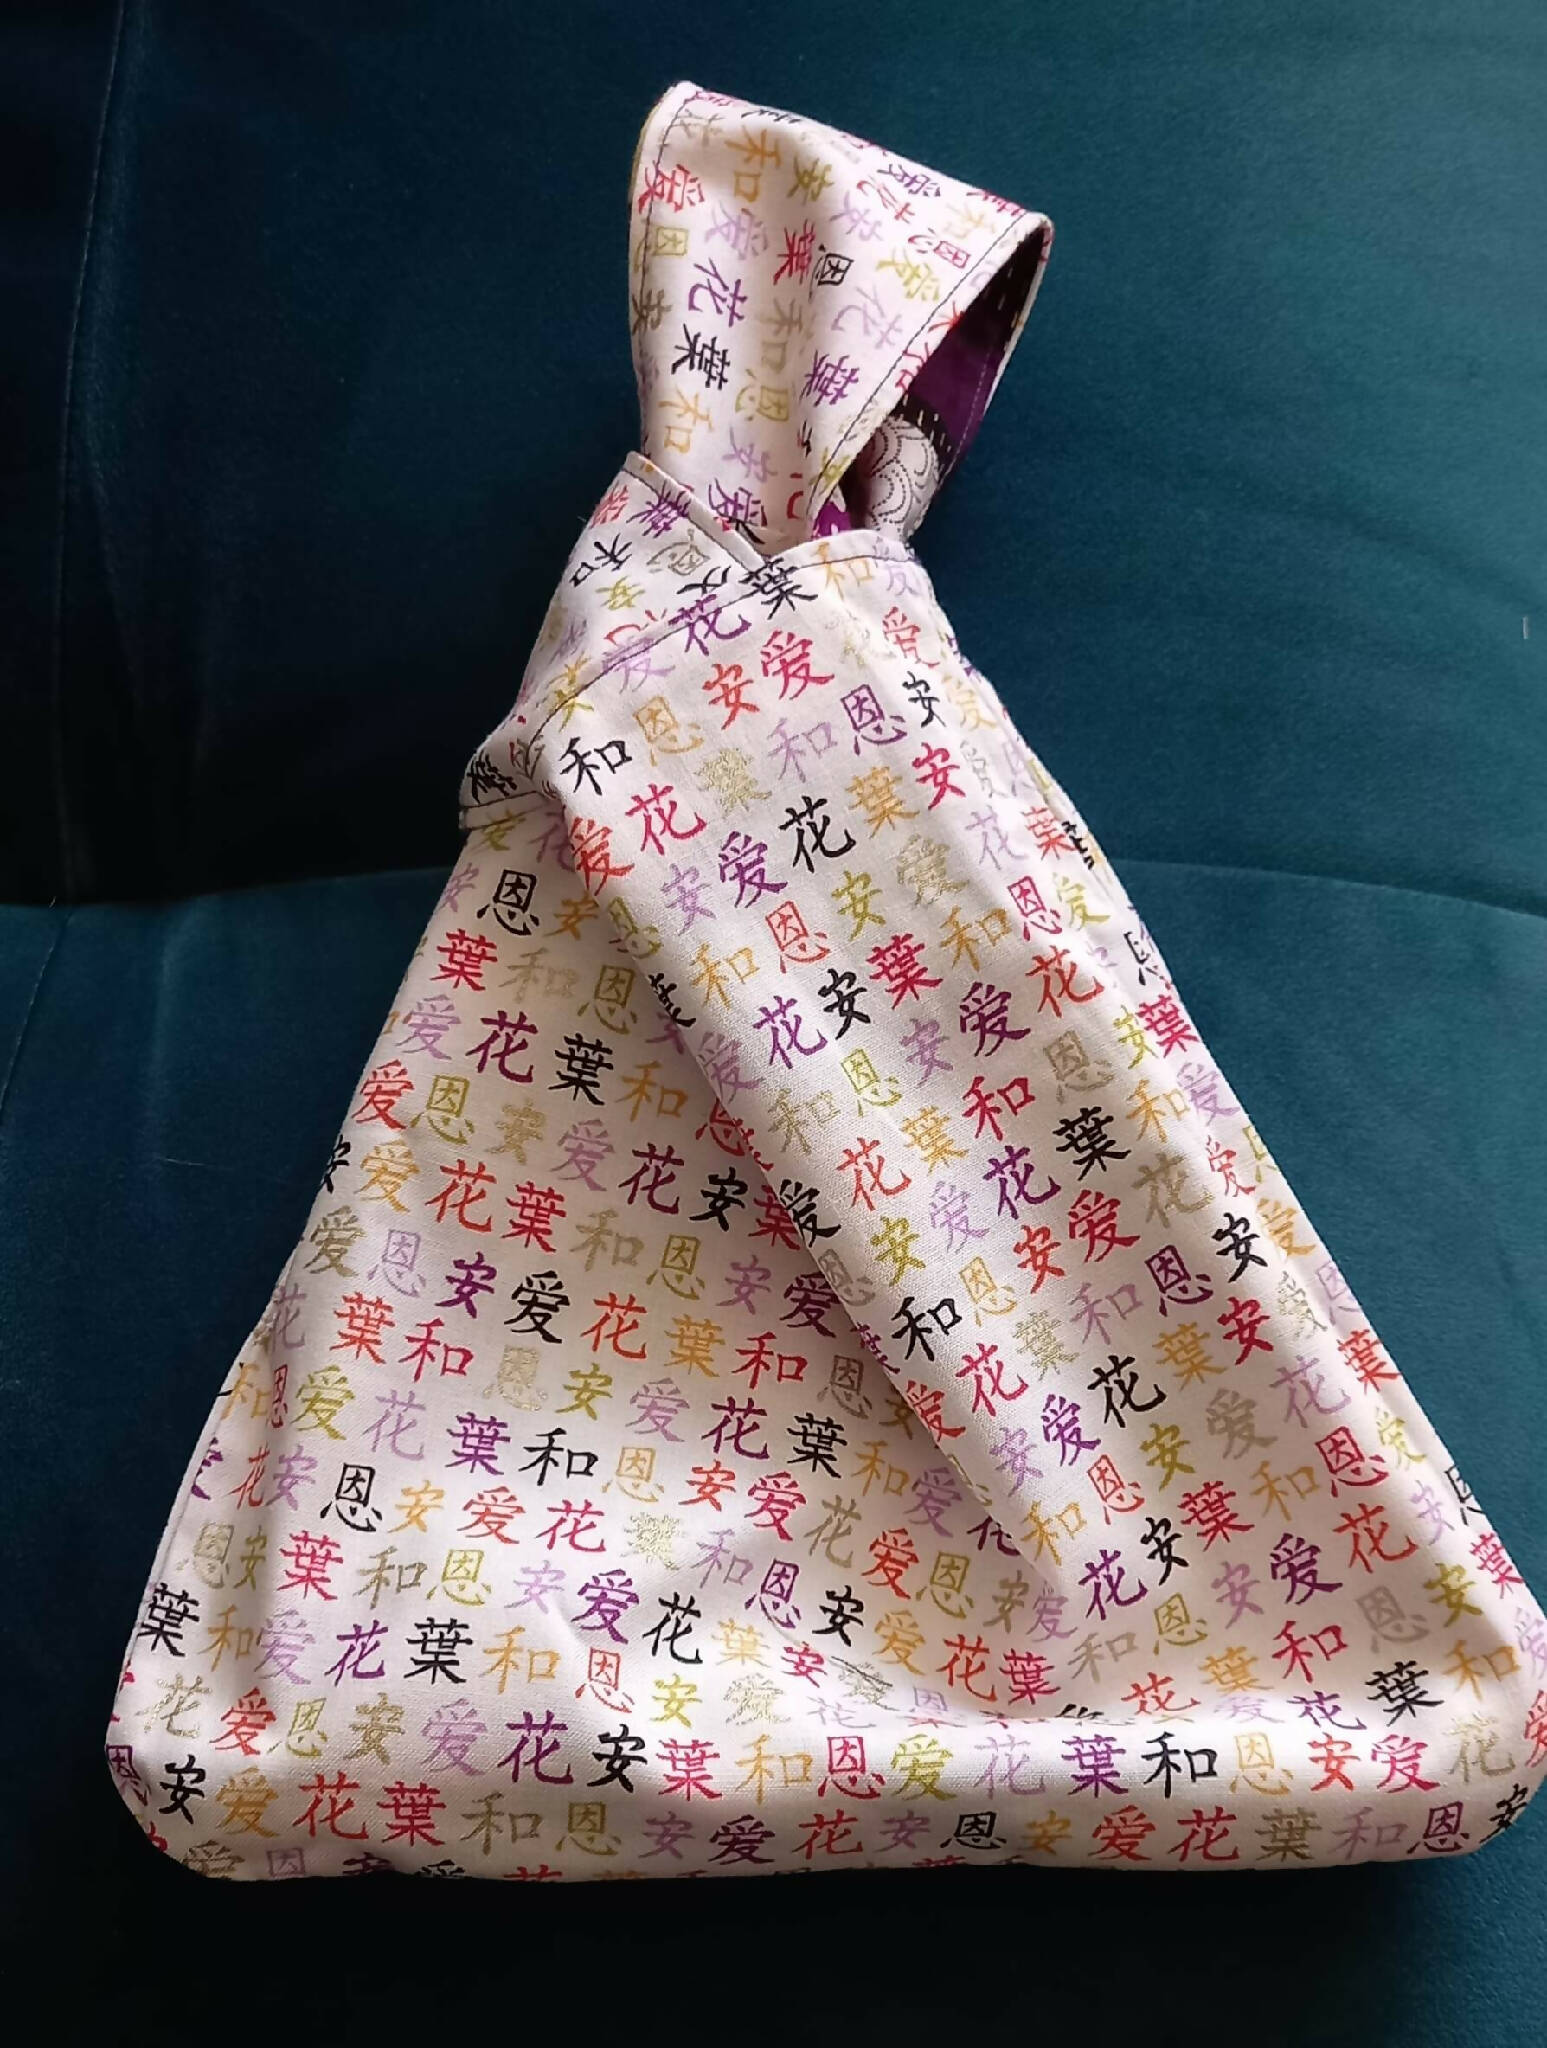 Japanese Knot Bag Heaxagons Small